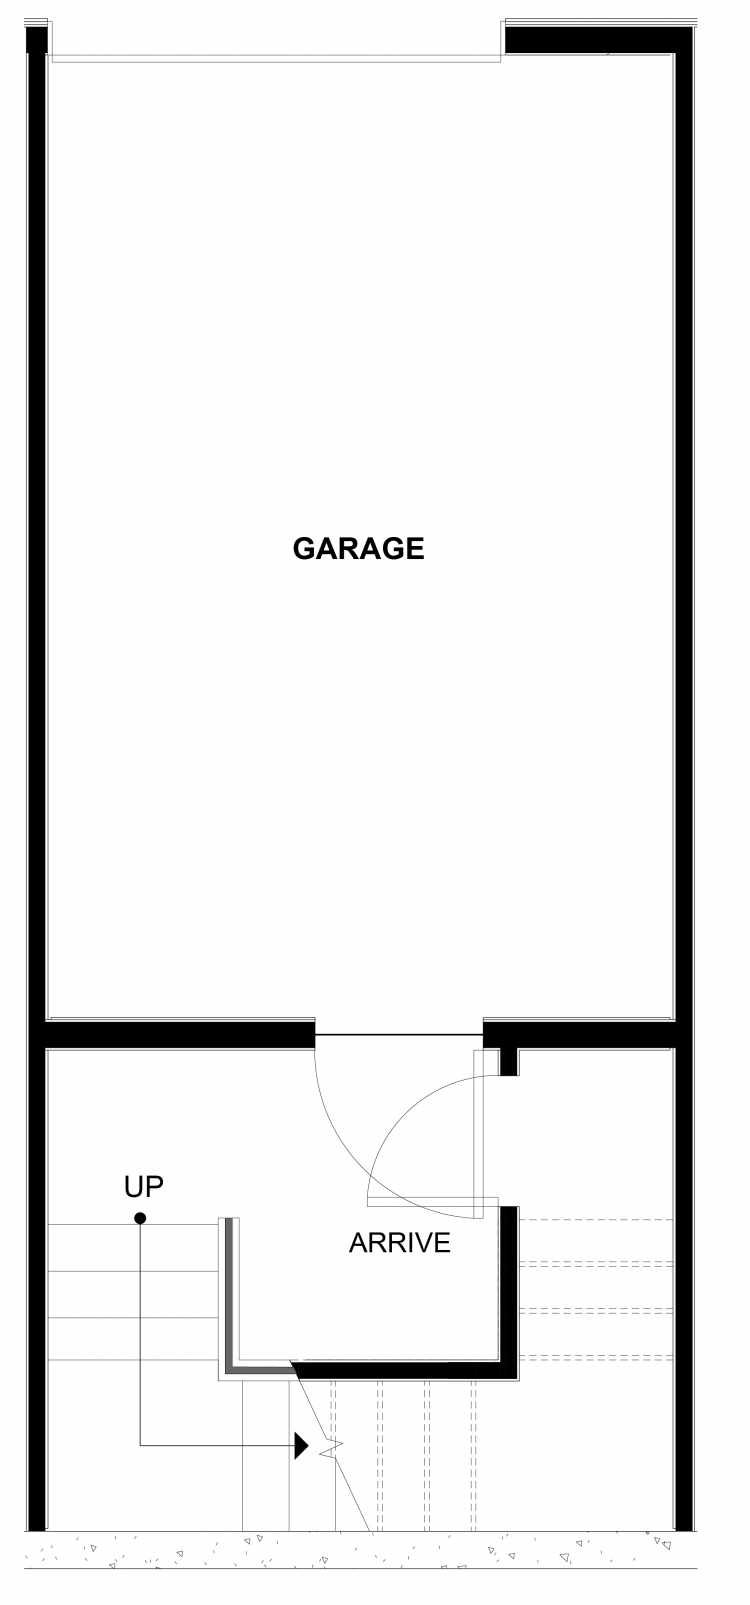 First Floor Plan of 1540 15th Ave E, One of the Grandview Townhomes in Capitol Hill